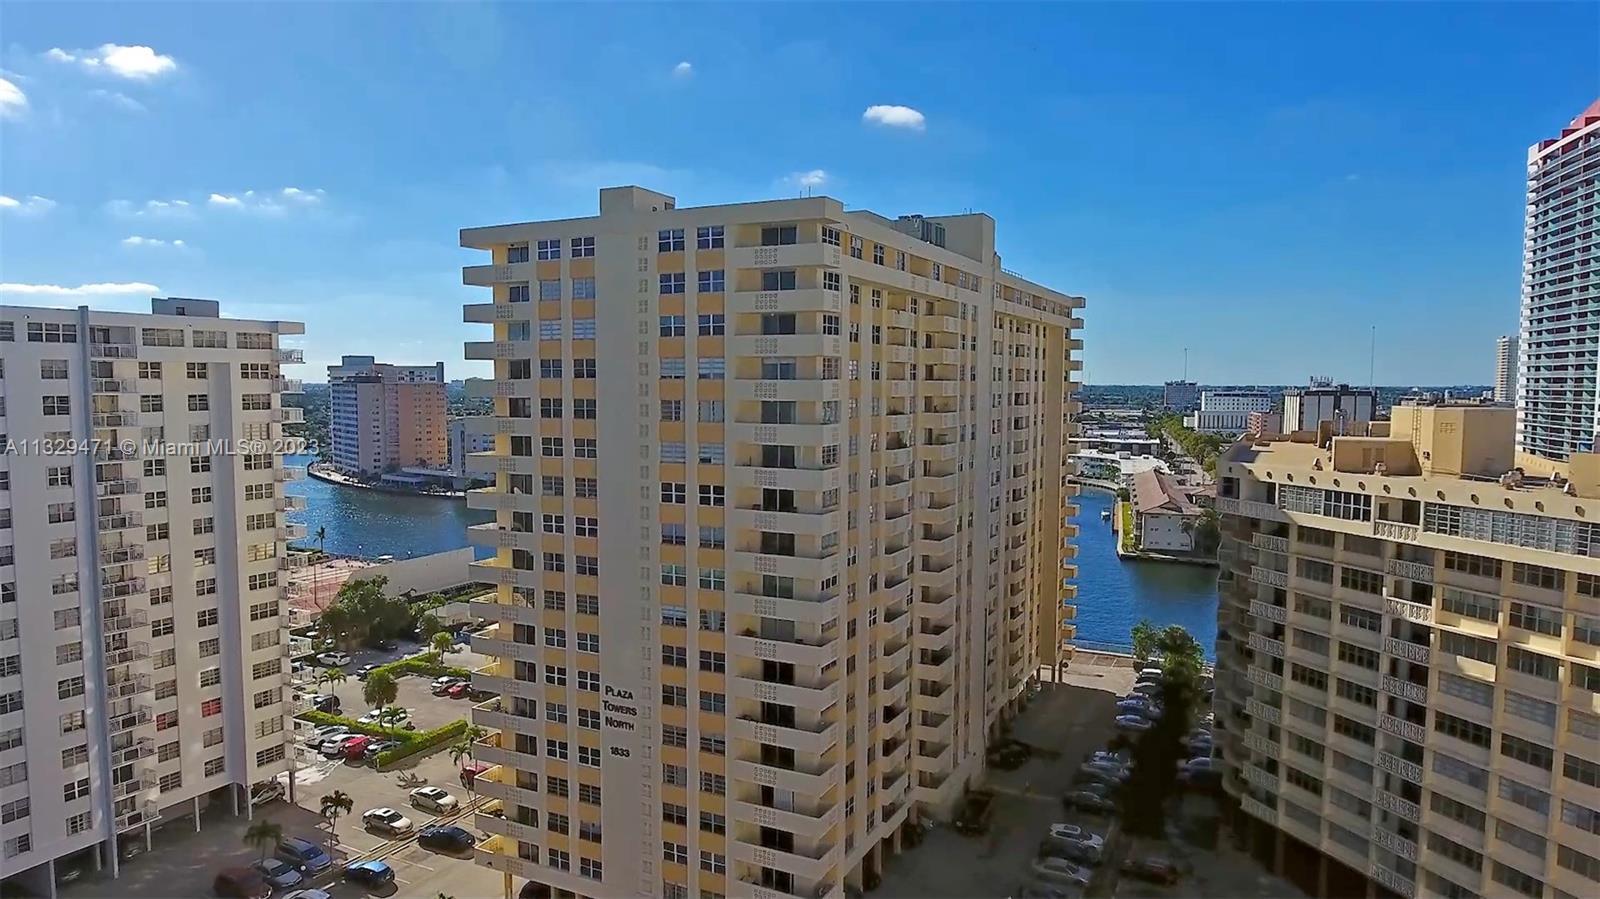 This spacious and bright condo offers 2 bedrooms and 2 bathrooms, with over 1,300 square feet of liv